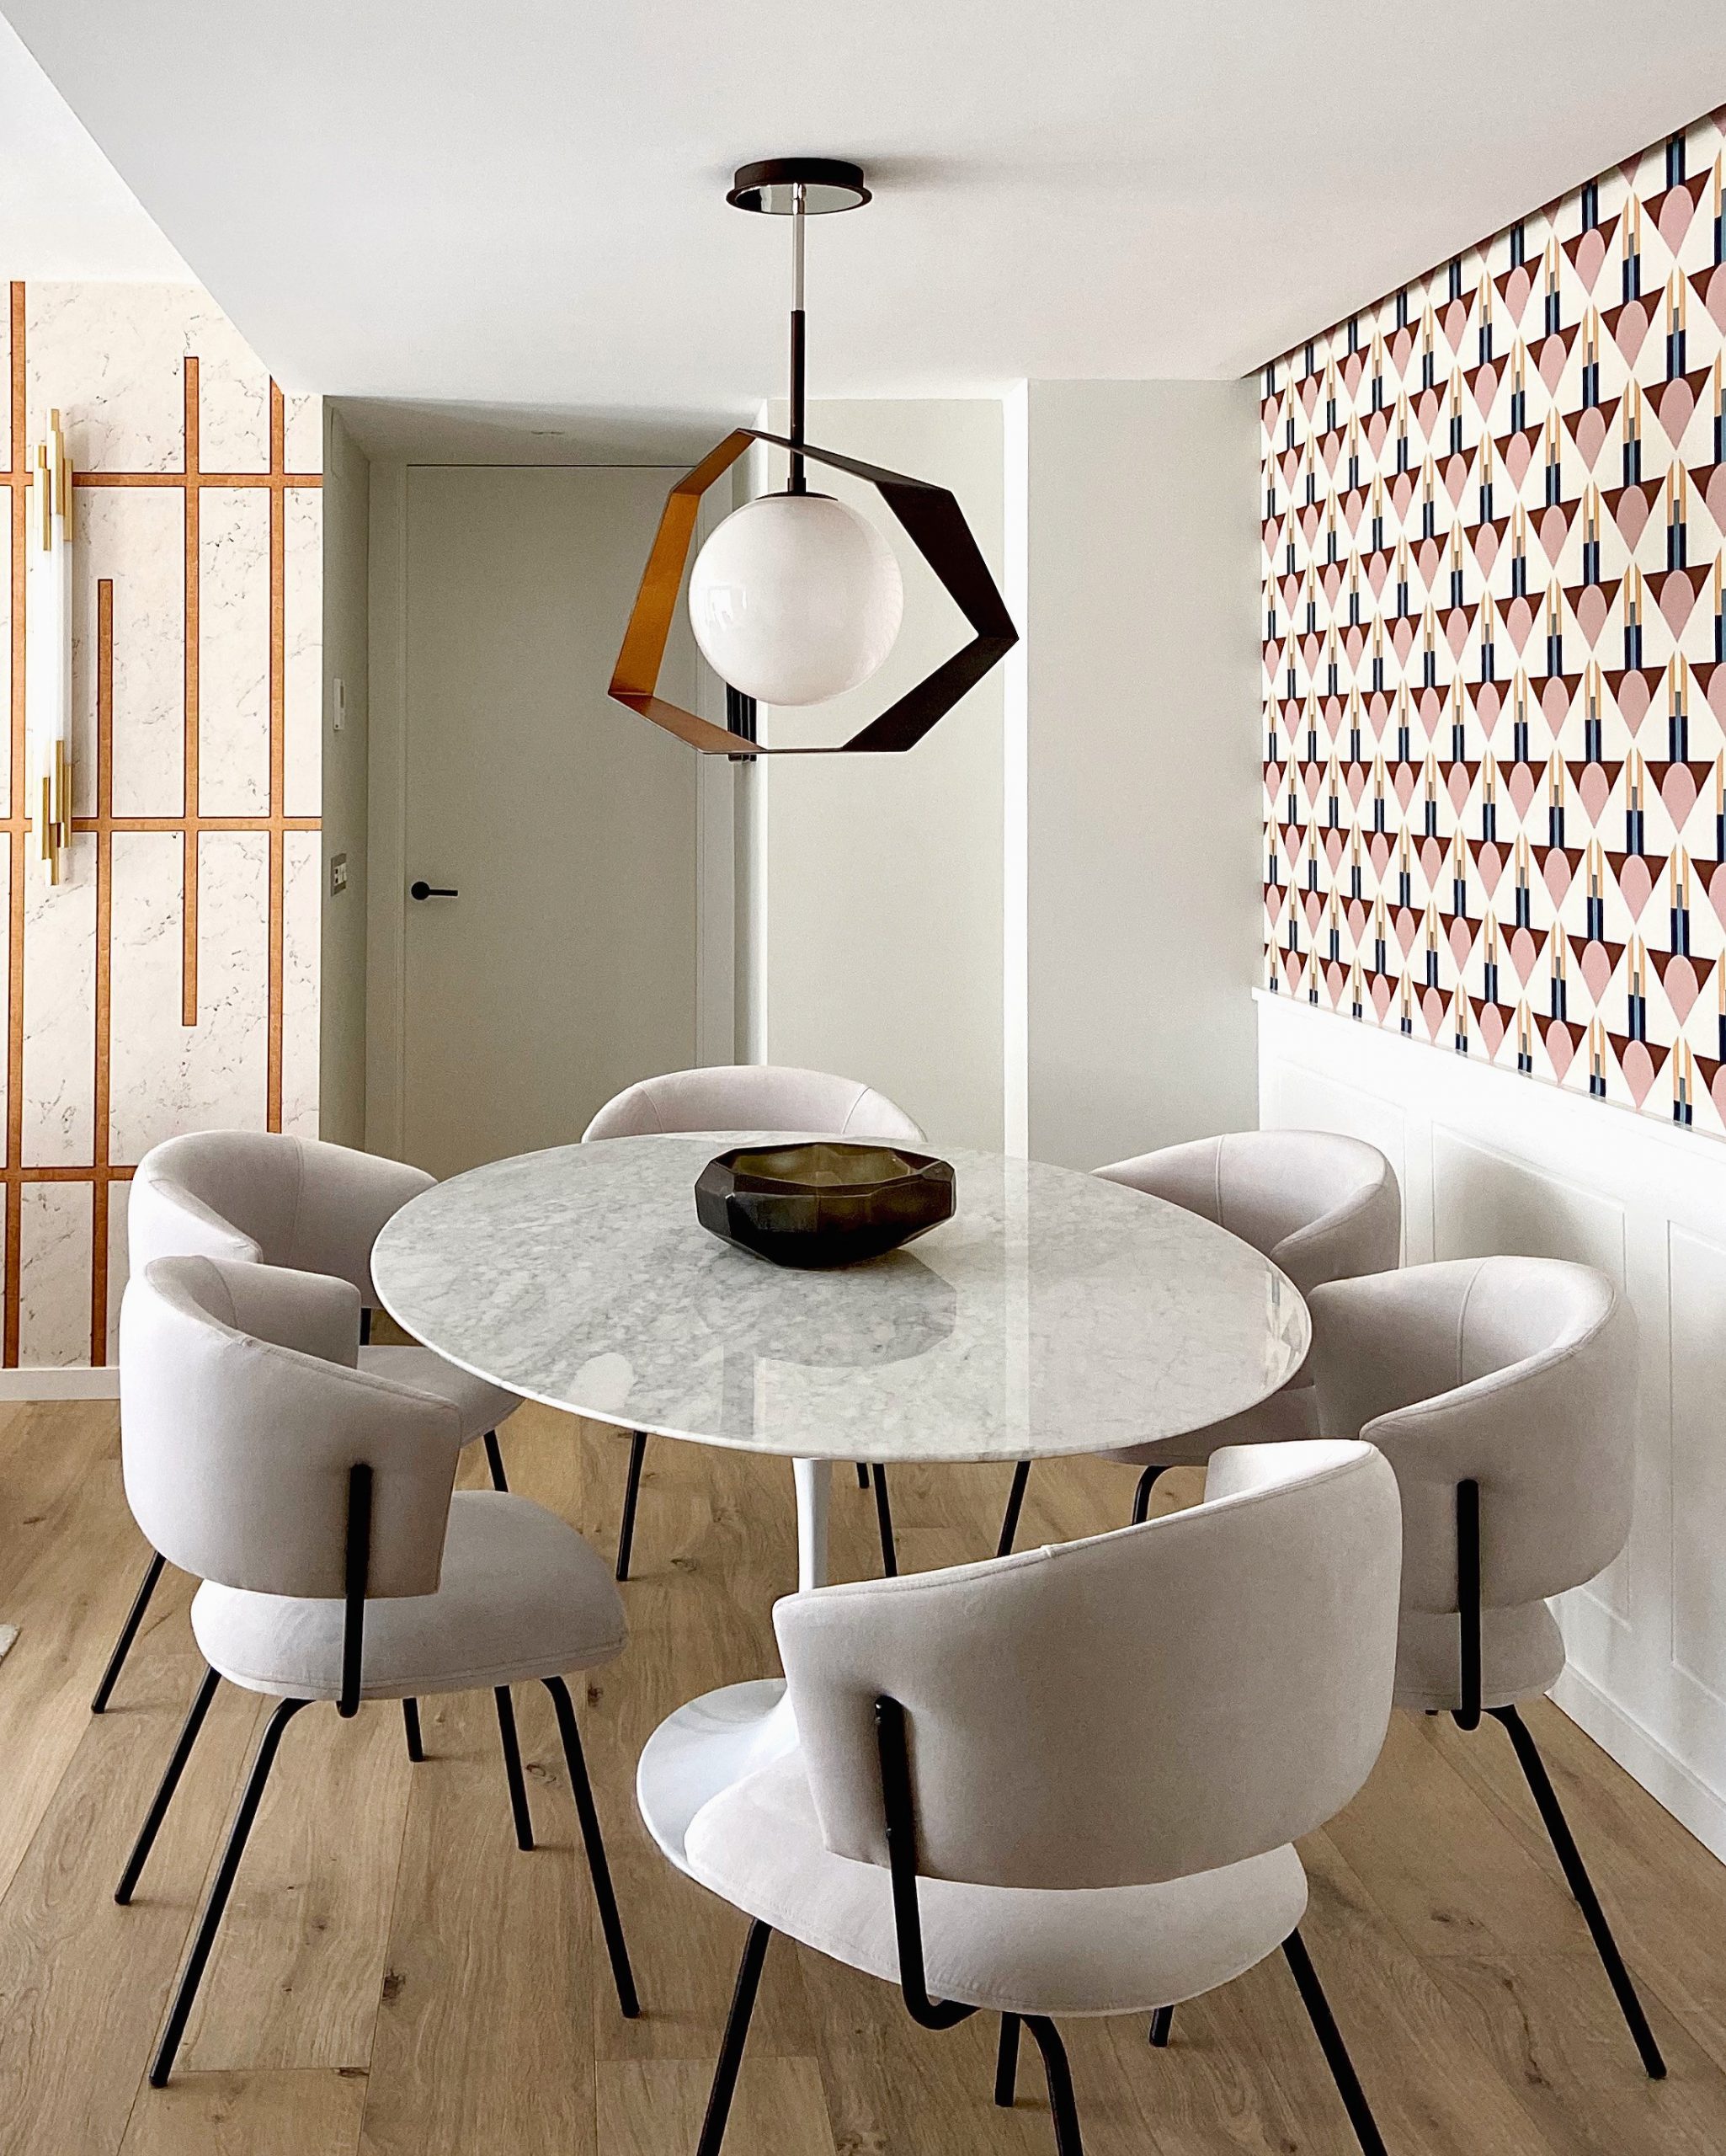 Dining in. The new going out with Hudson Valley Lighting Group